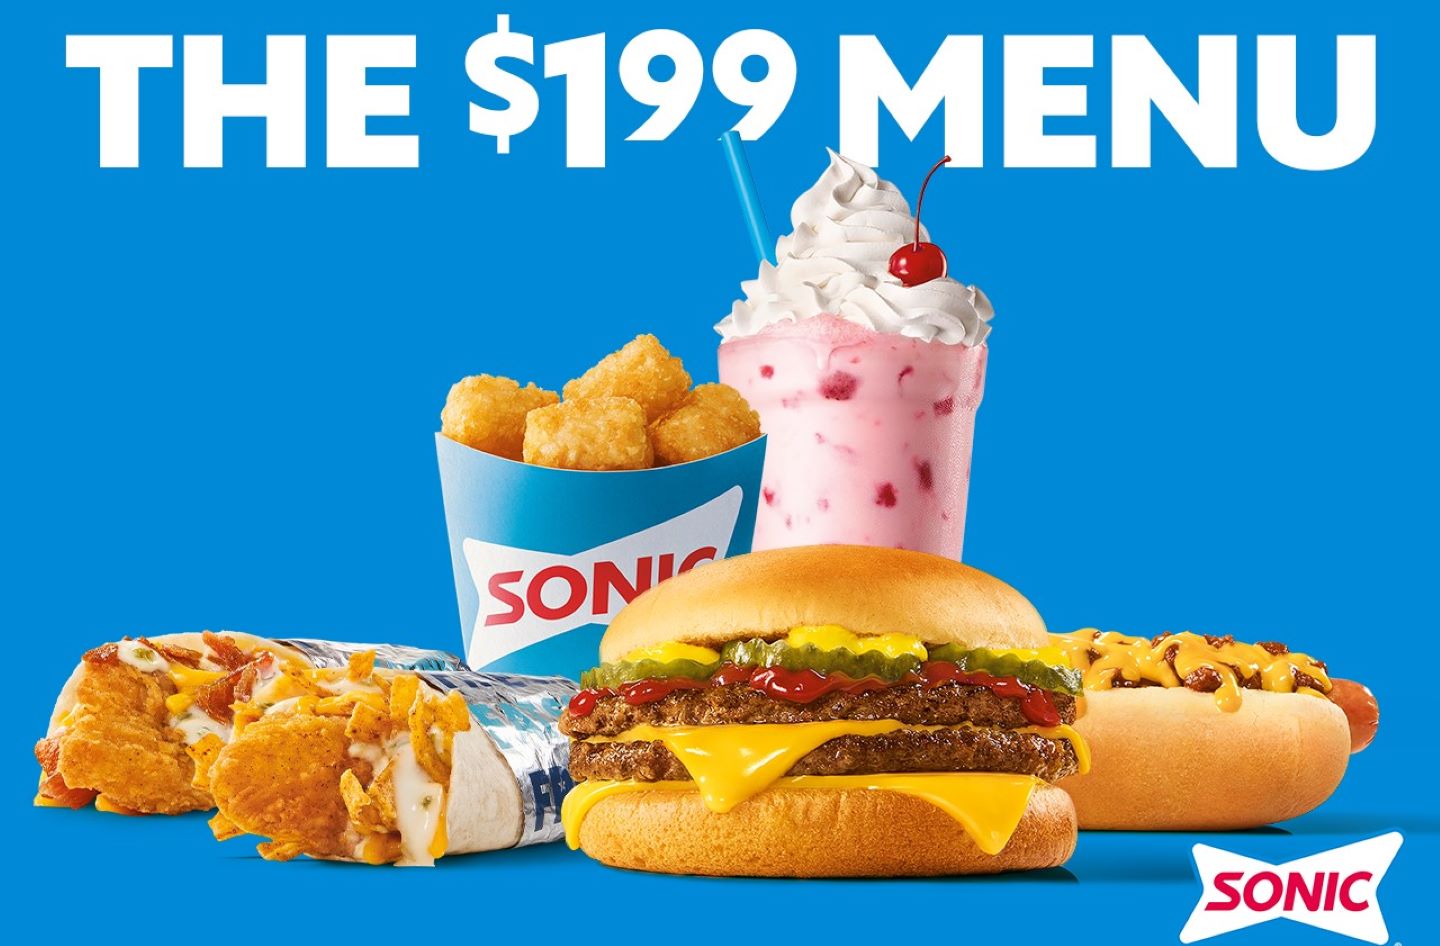 Drive-in restaurant brand Sonic introduces a .99 savings menu in the US